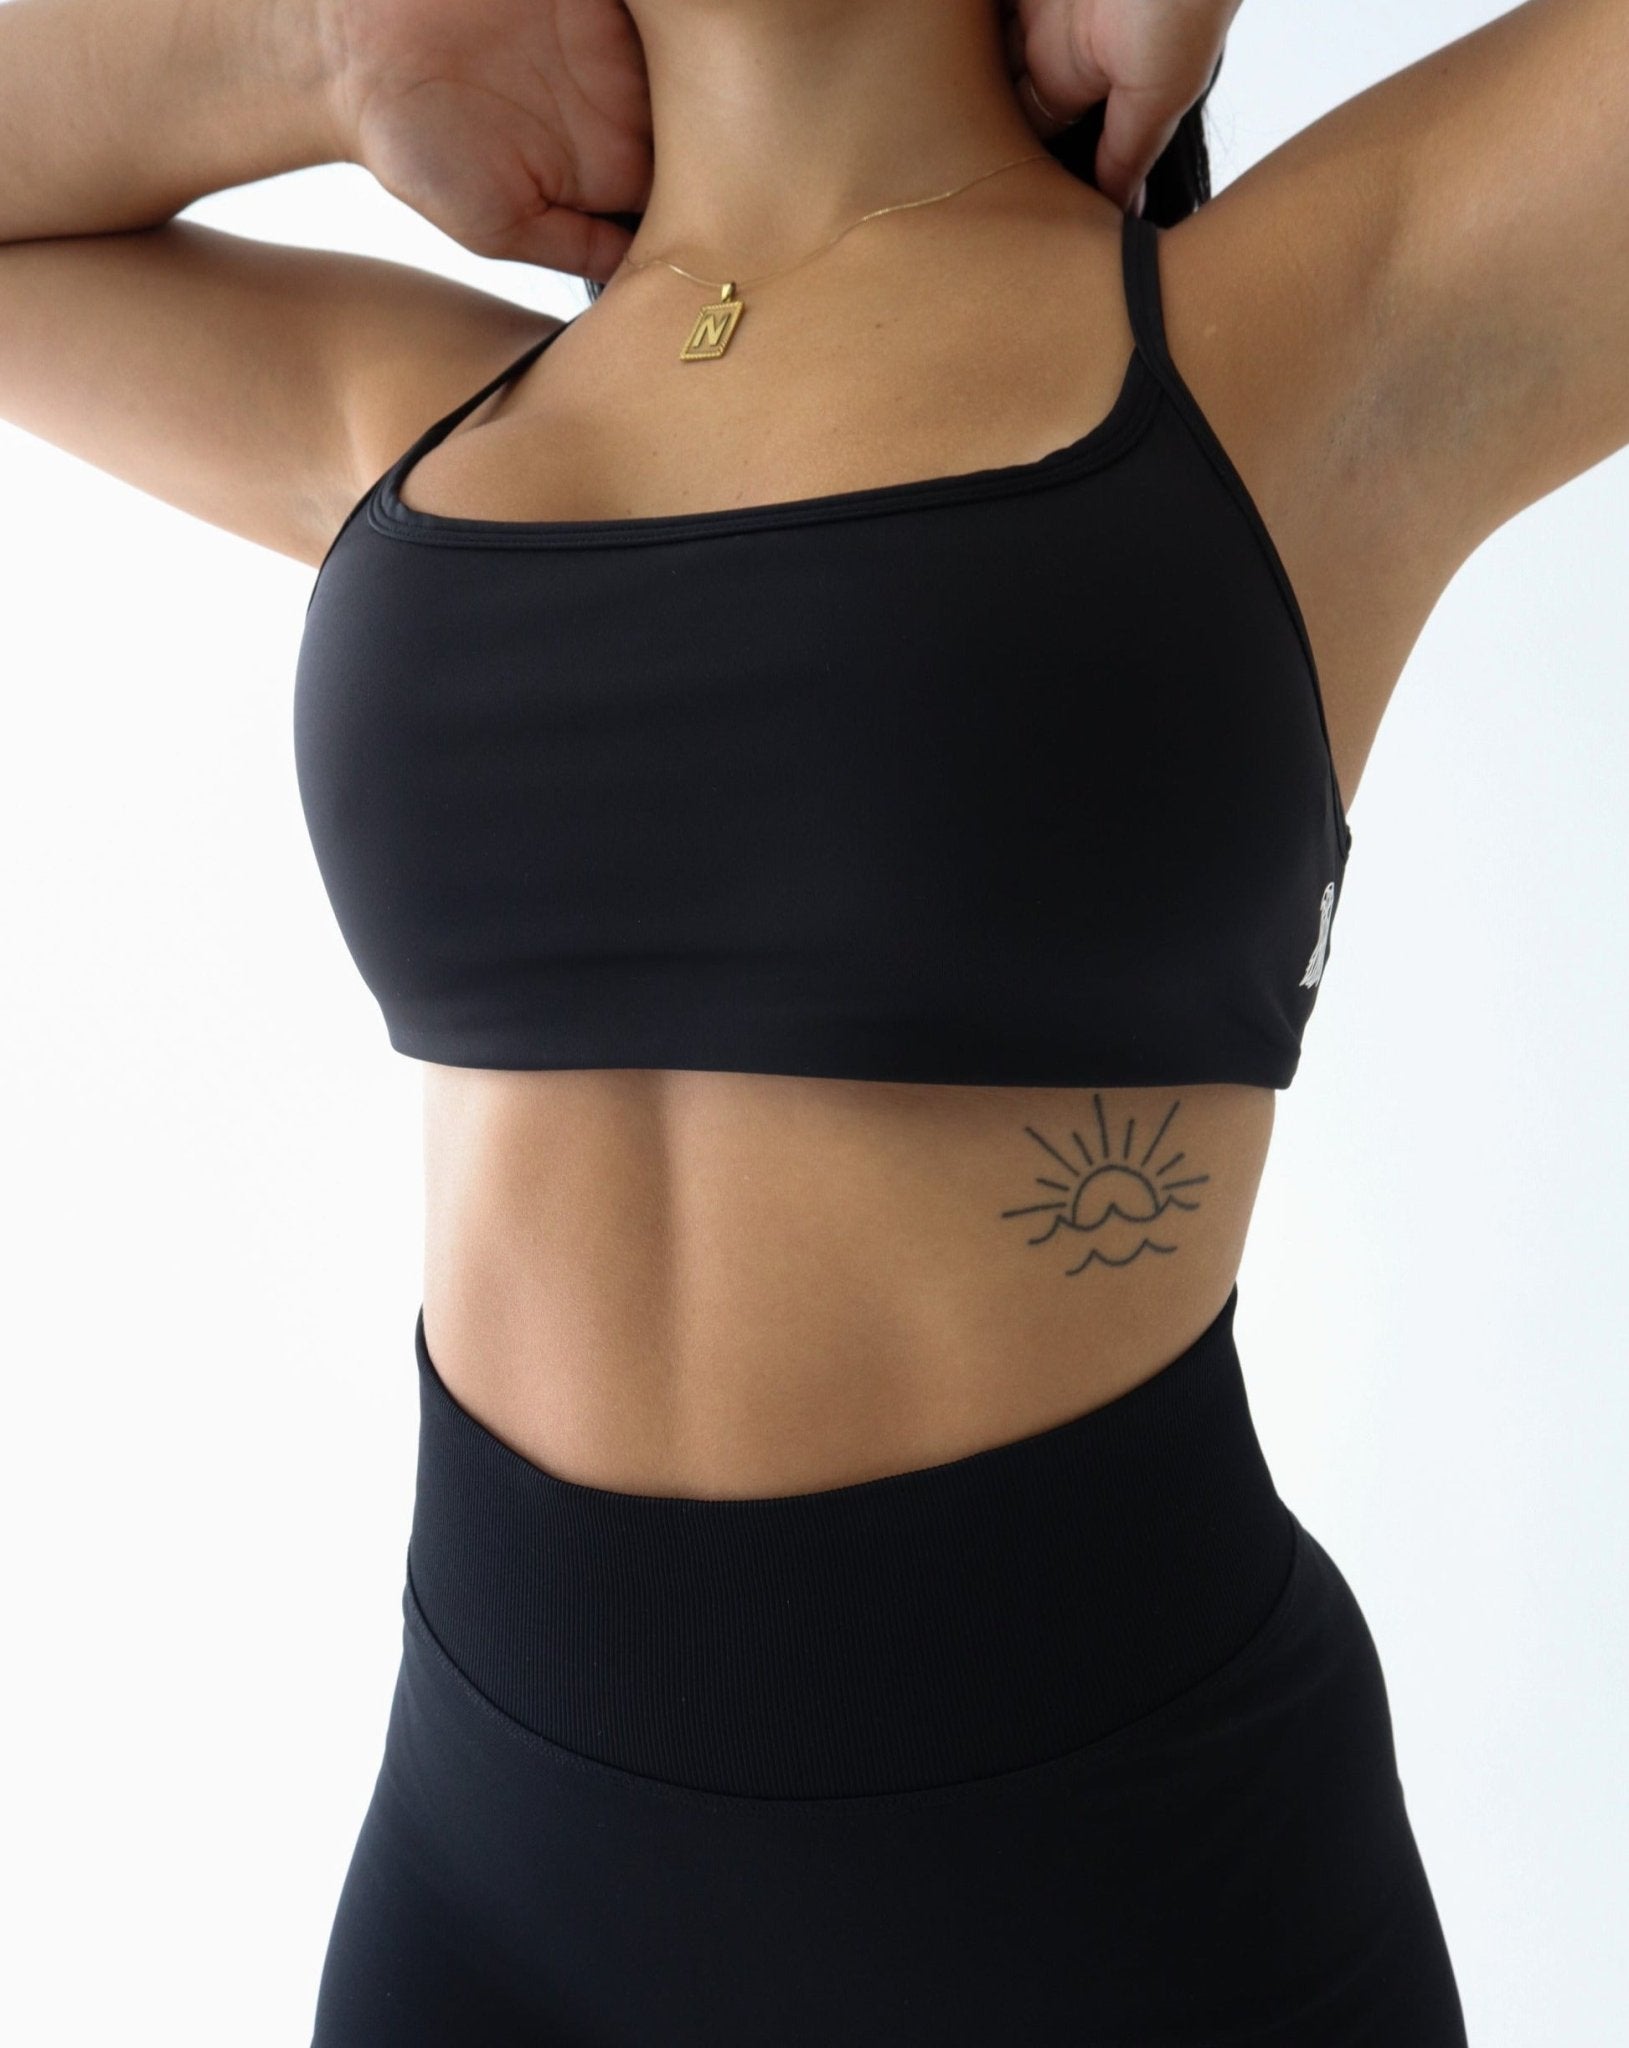 REFINE Sports Bra - BLACK - LIBERA Fitness Apparel. Revamp your gym wardrobe with our Refine Sports Bra, featuring double-layered, stretchy fabric for breathability and opacity. Elevate your style with the iconic LIBERA logo.